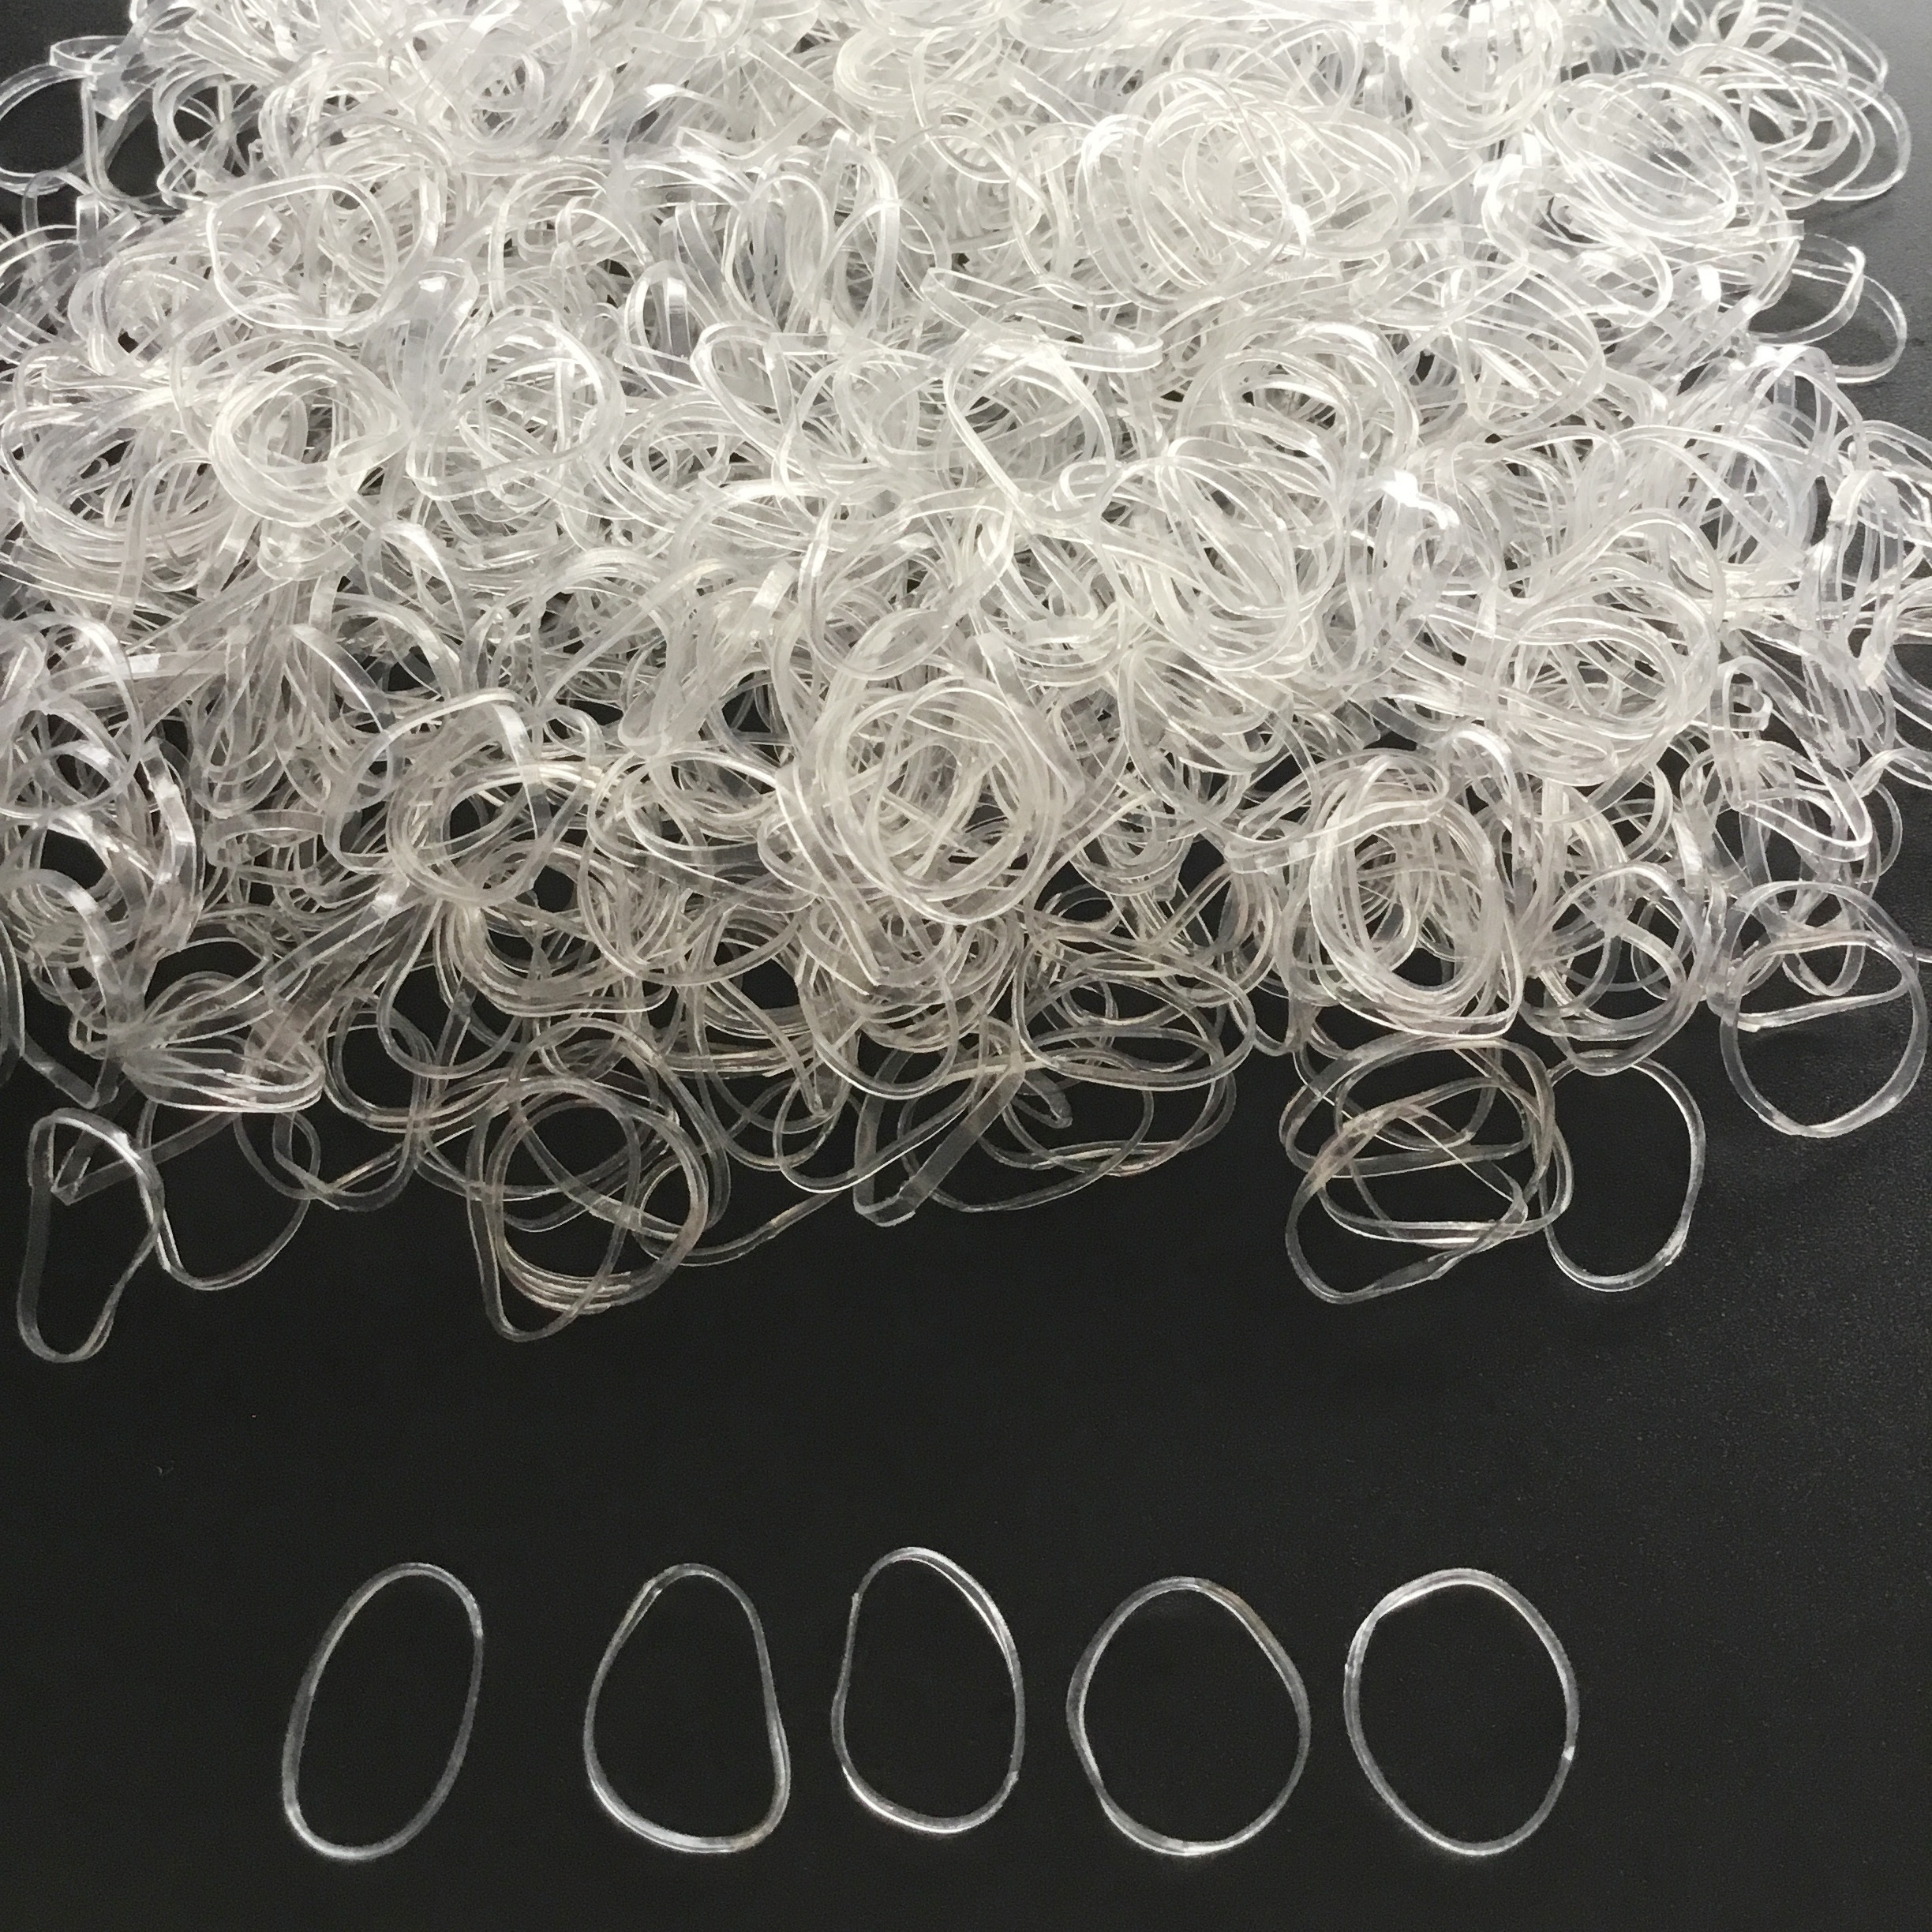 Mr. Pen- Hair Bands, Rubber Bands for Hair, Clear,800 Pack, Elastic Hair Ties, Small Hair Ties, Elastic Hair Bands, Clear Rubber Bands for Hair, Clear